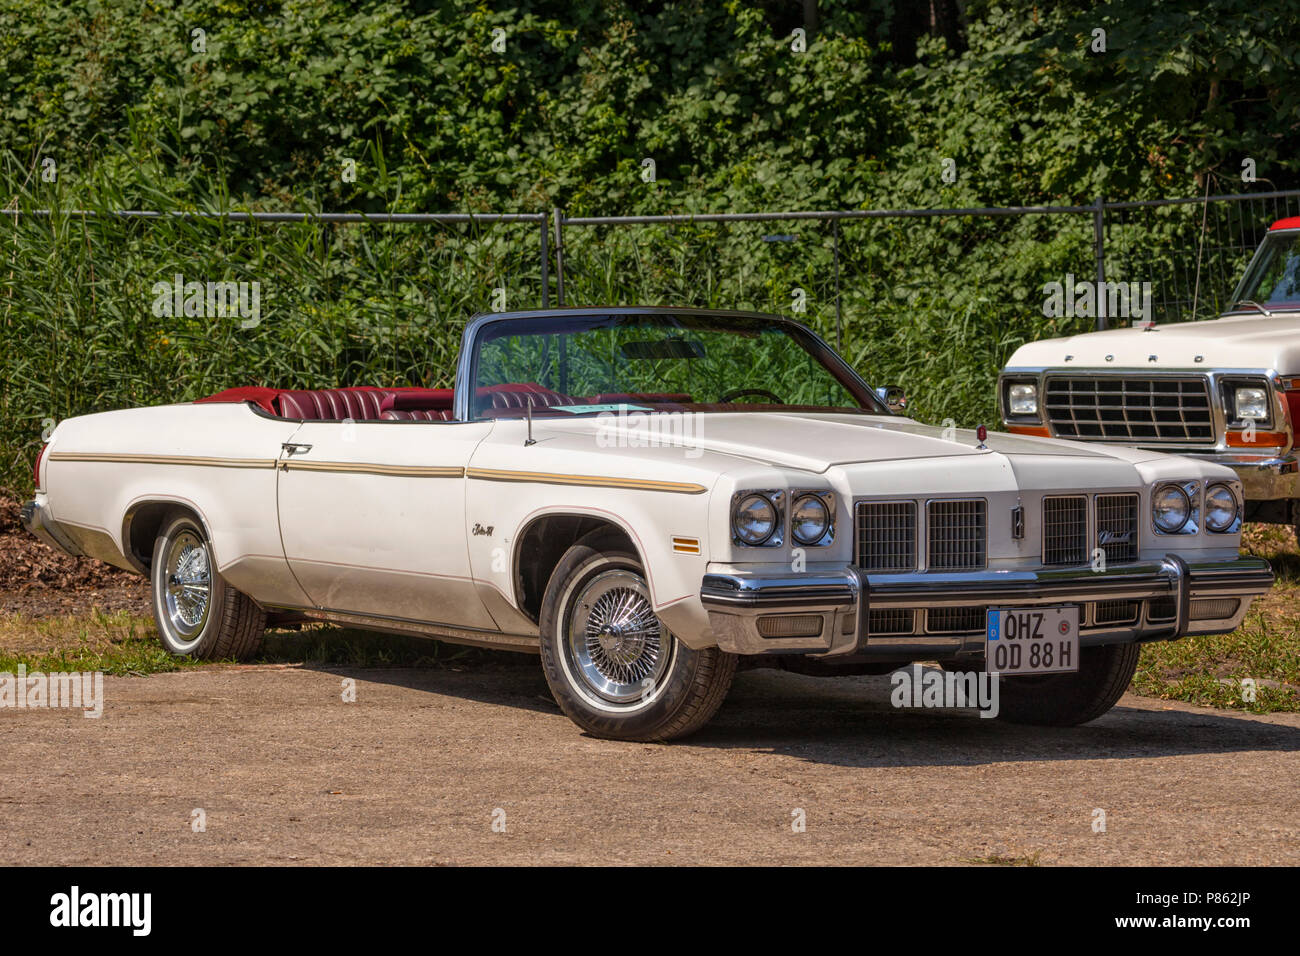 Stade, Germany - July 8, 2018: A vintage 1975 Oldsmobile Delta 88 Royale at 5th Summertime Drive US car meeting. Stock Photo